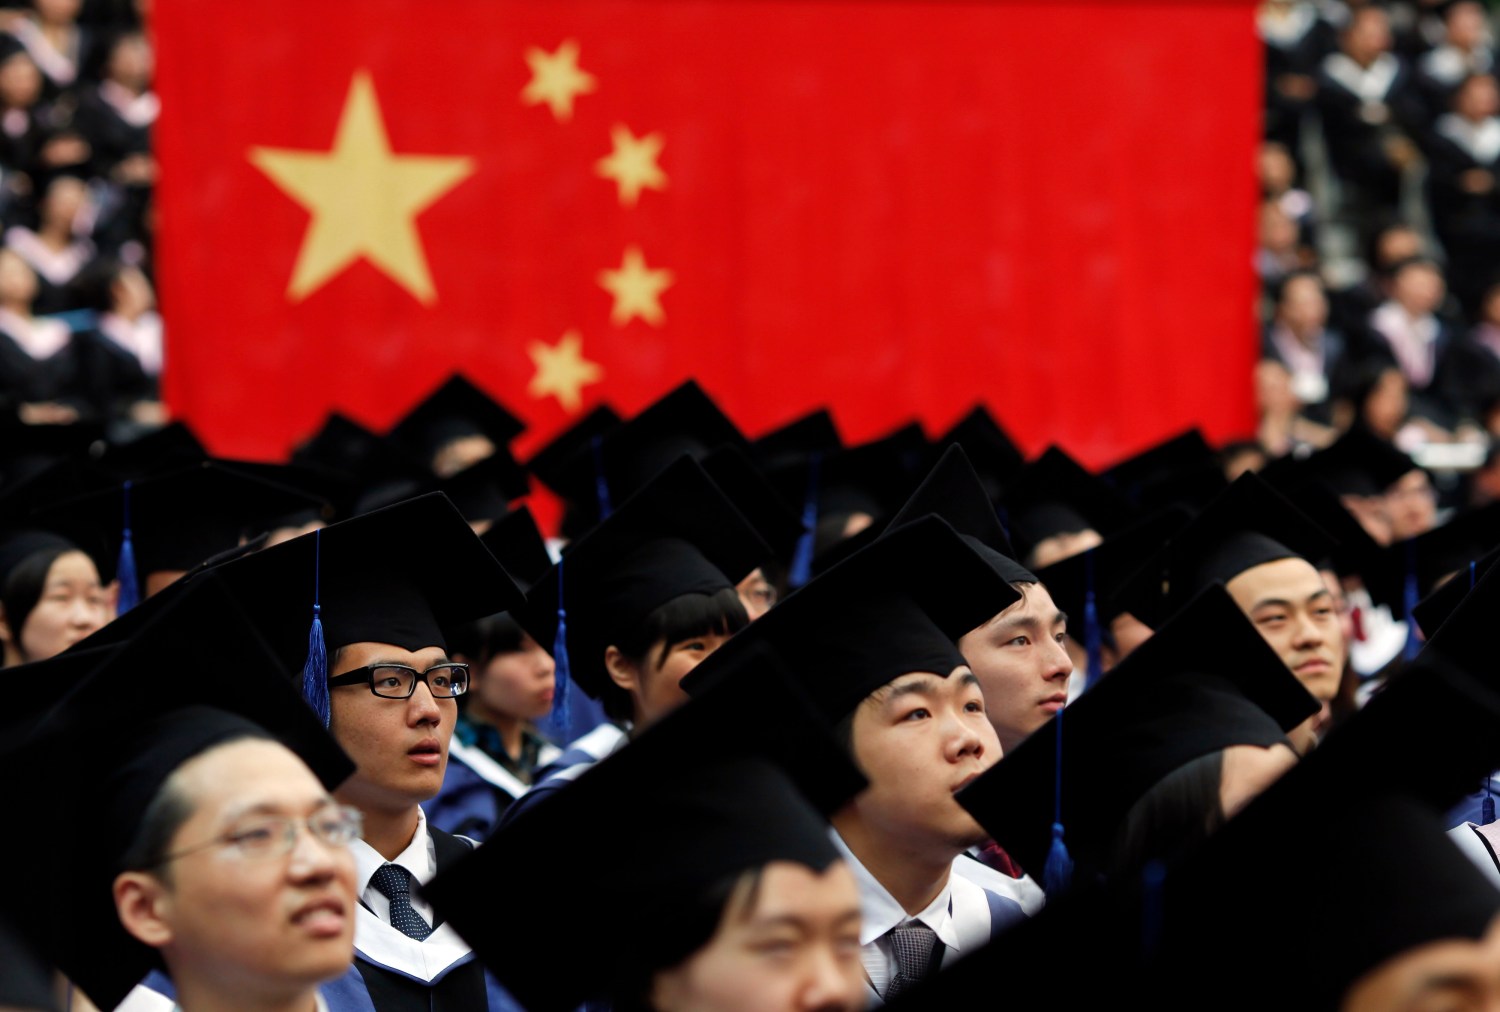 Students attend their college graduation ceremony in Shanghai's Fudan University  July 2, 2011. China began expanding university enrollment in 1996 to meet growing personnel demands as the economy boomed, but Xinhua News Agency has reported concerns by the Chinese State Council over creating enough jobs for millions of college students who will graduate between 2011 and 2015. University education is a key component of China's goal to create a broad urban tier of middle class families with "well-off characteristics" nationwide. China produces about 830,000 college graduates every year. REUTERS/Carlos Barria (CHINA - Tags: POLITICS EDUCATION)